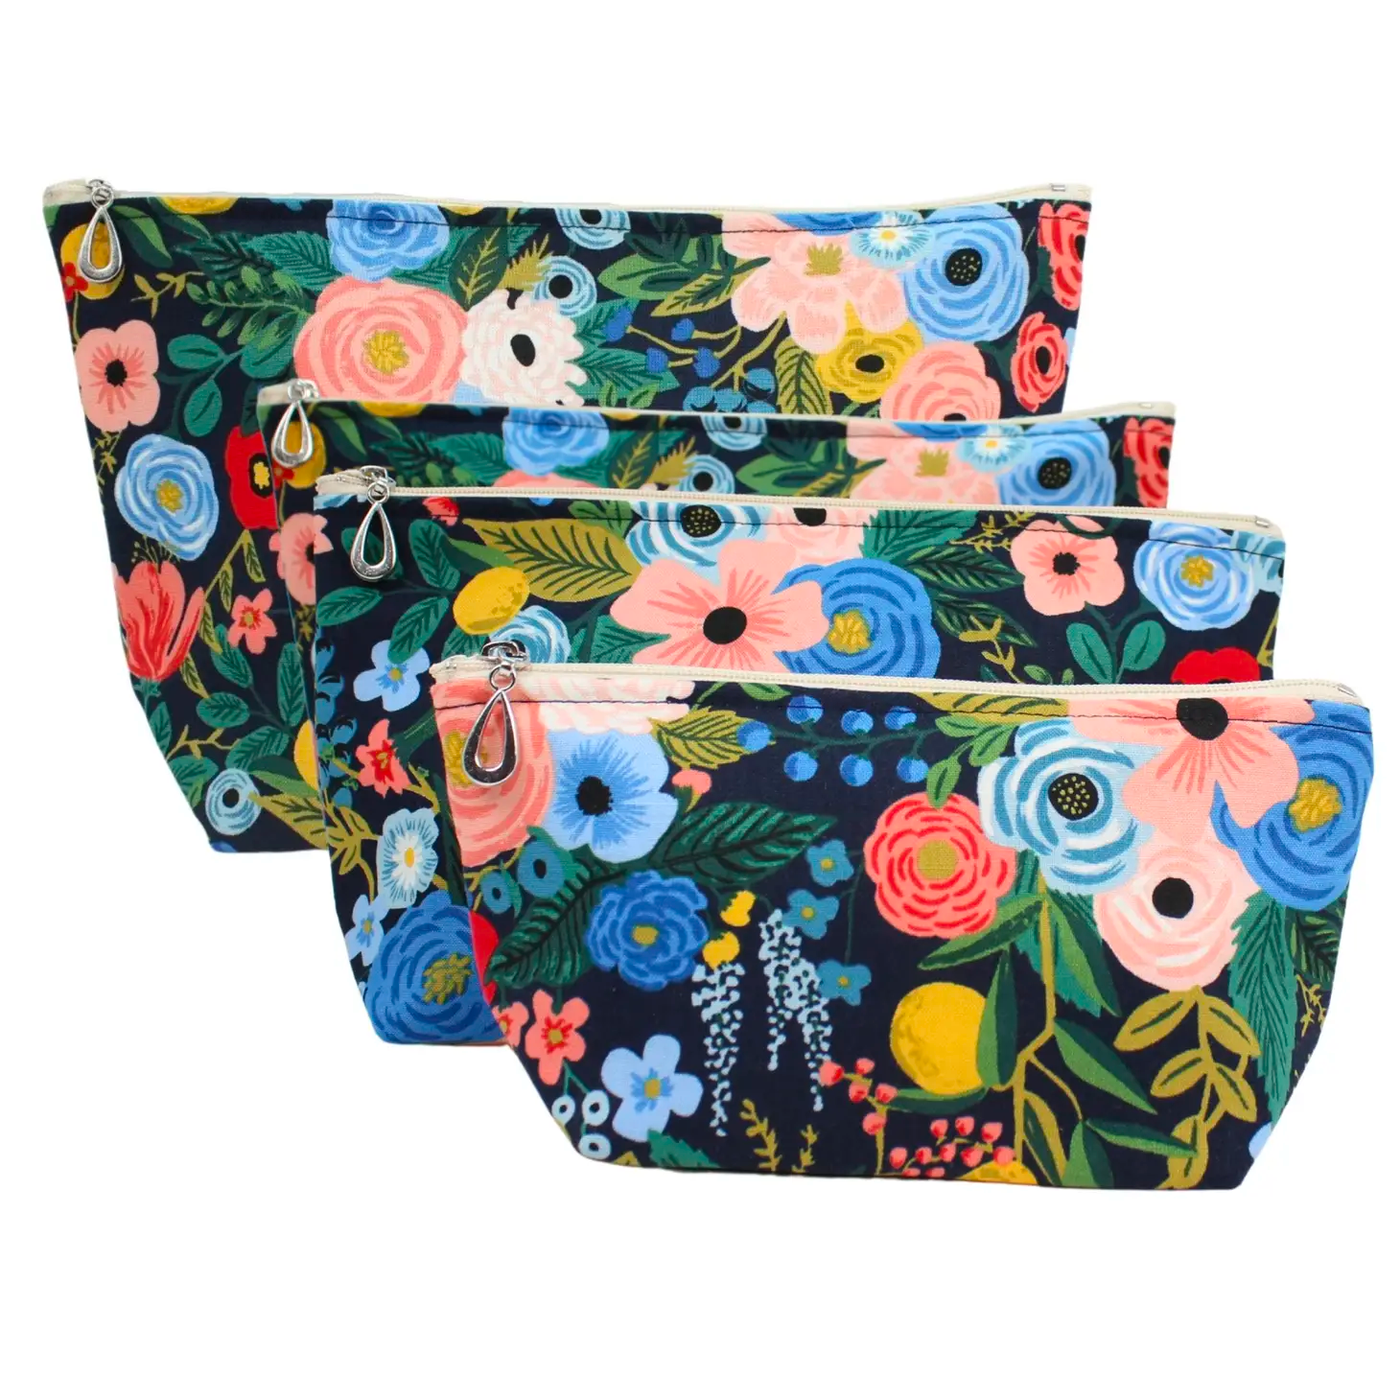 COSMETIC BAG NAVY FLORAL (Available in 4 Sizes)